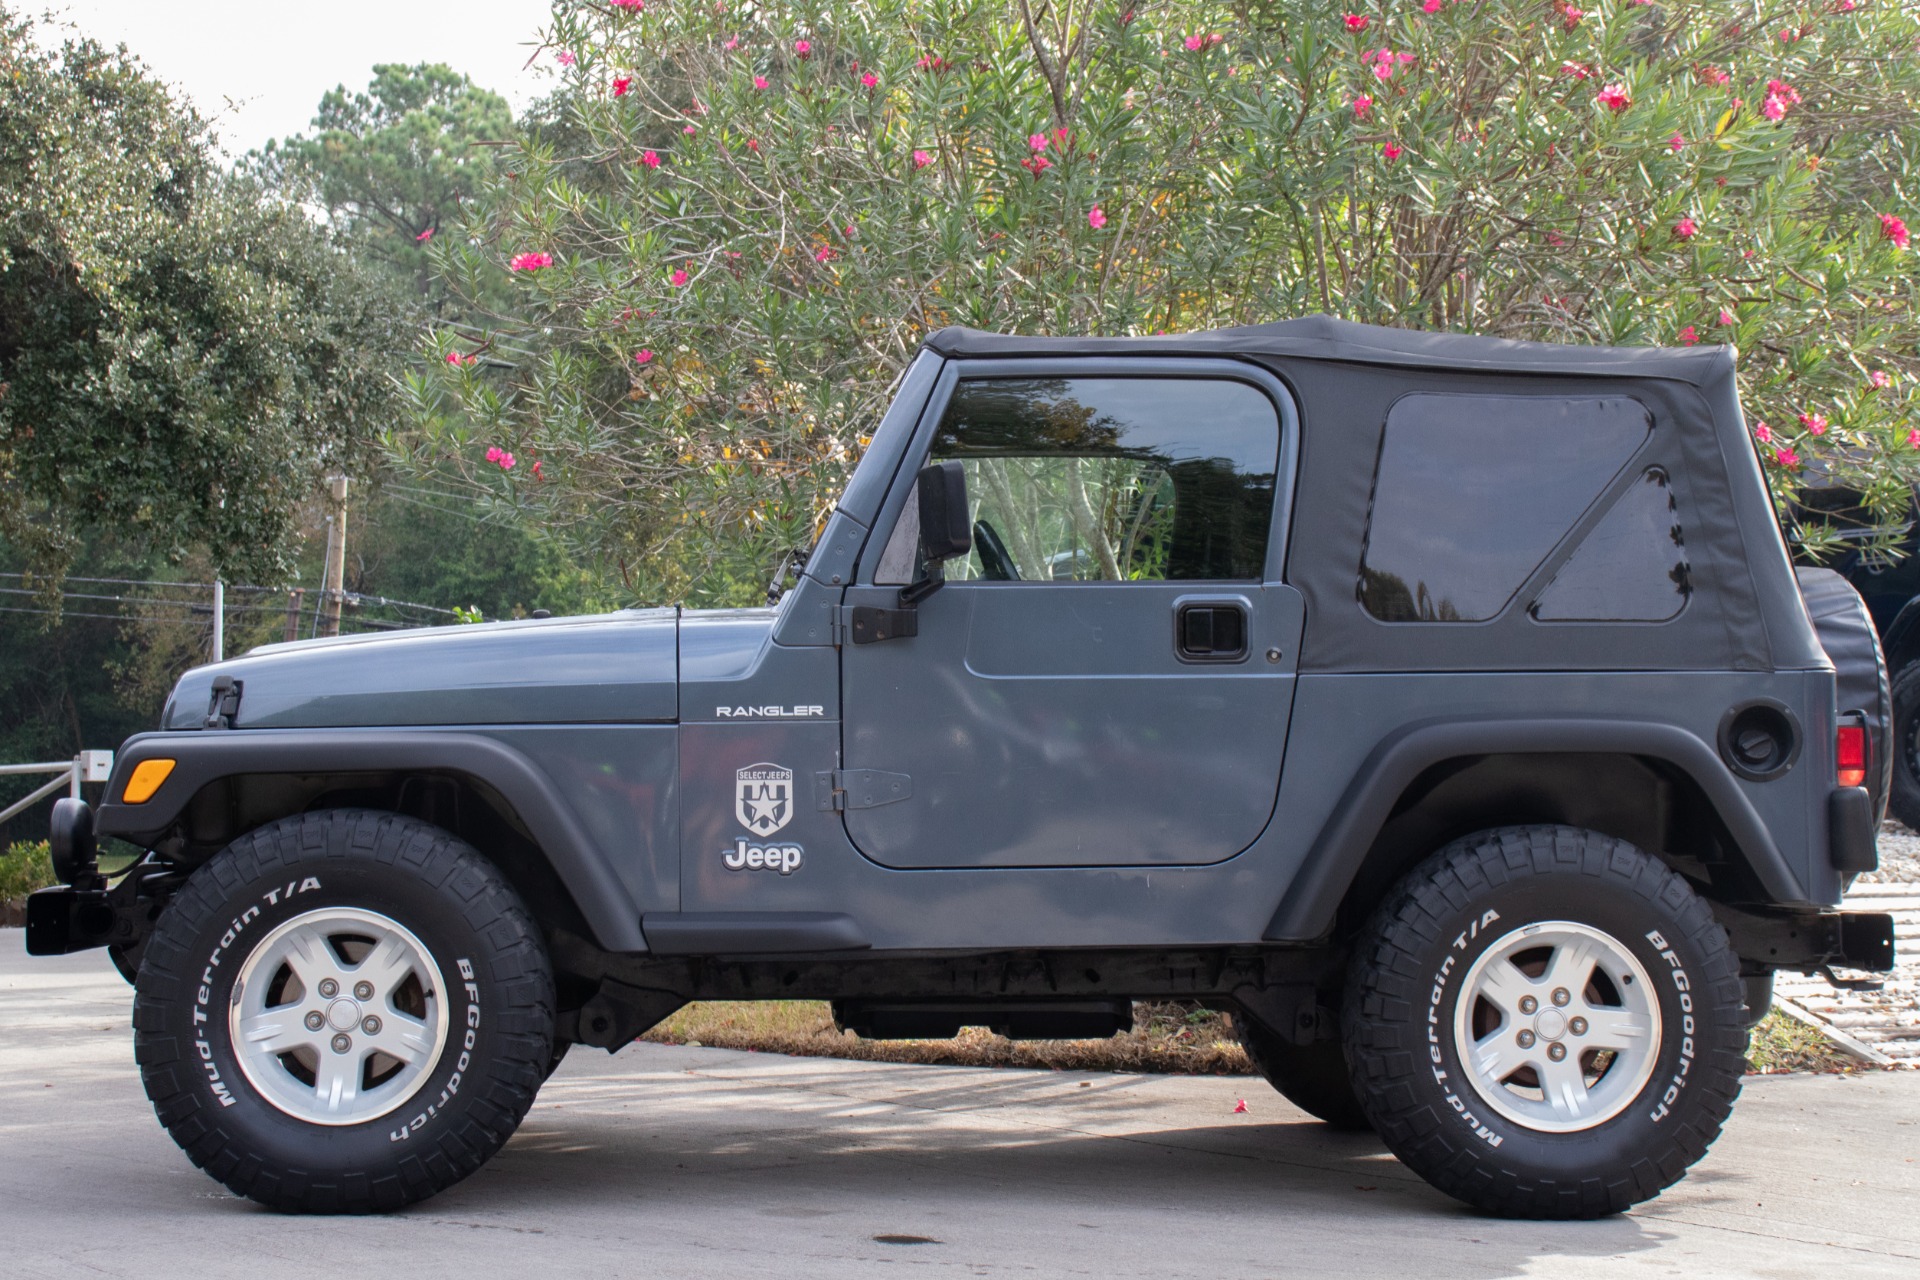 Used 2002 Jeep Wrangler Sport For Sale ($12,995) | Select Jeeps Inc. Stock  #736665